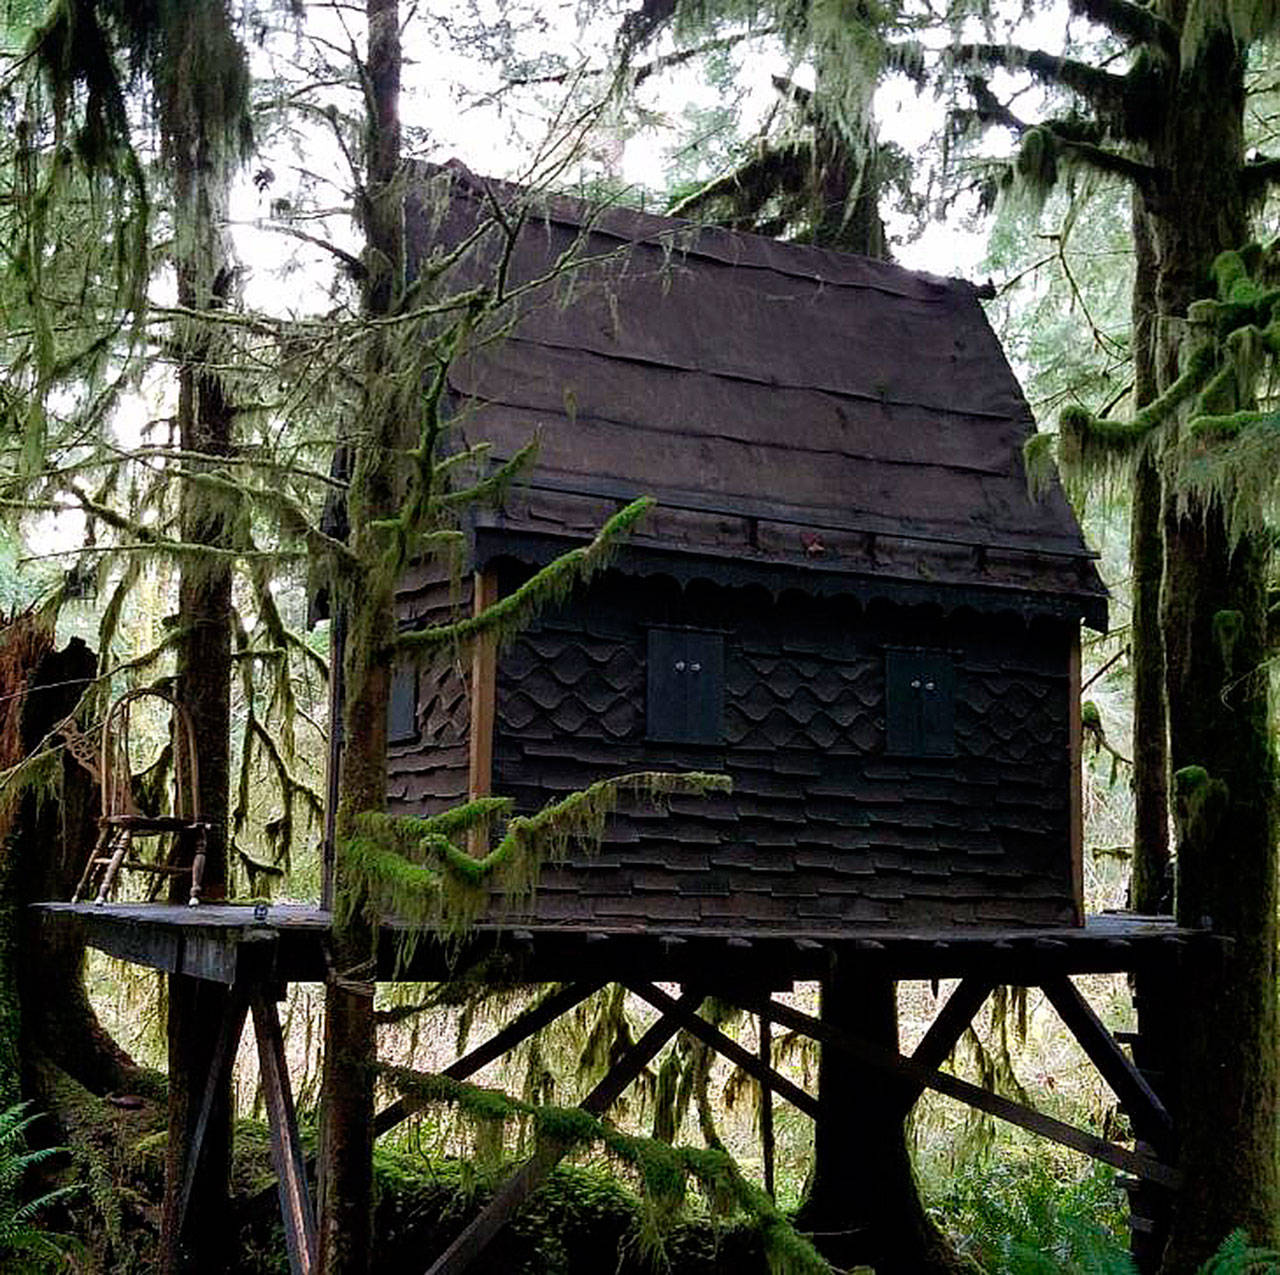 A tree house gingerbread-style cabin in the Snoqualmie National Forest has been constructed for at least seven years and was found to contain child pornography in November 2016. Photo courtesy of King County Sheriff’s Office